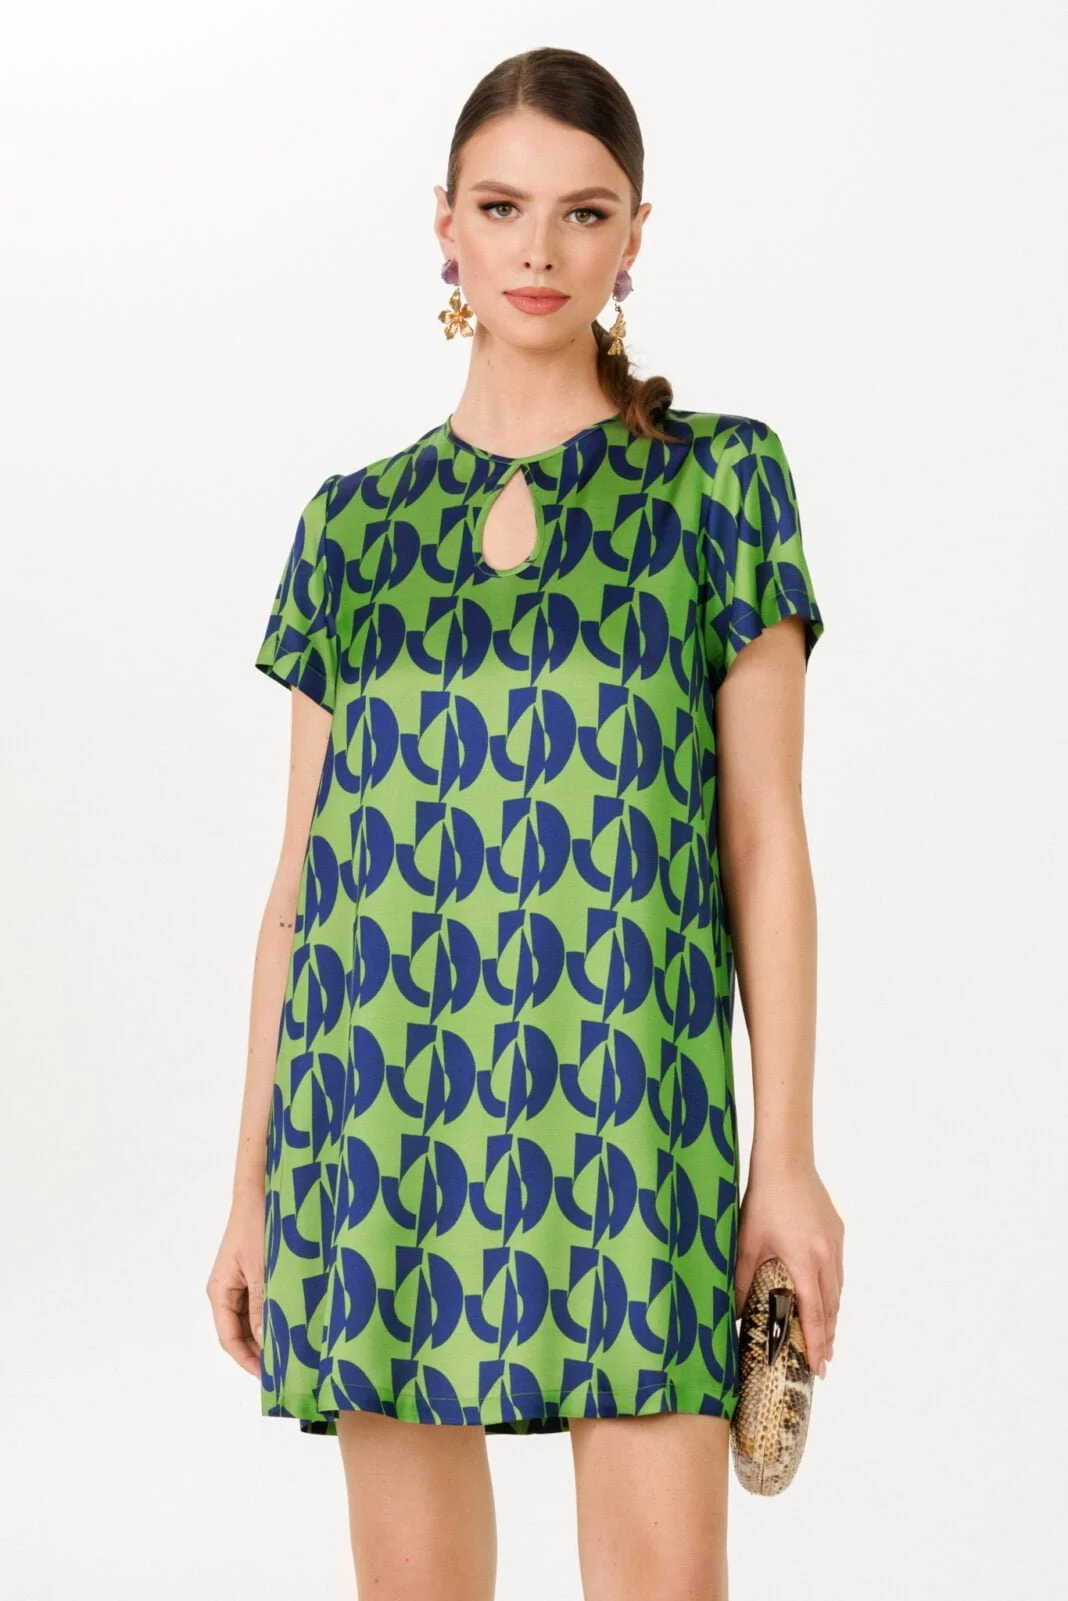 Luxurious Party Cocktail Summer Mini Dress - Green Navy Geometric Print, 70s Inspired Style